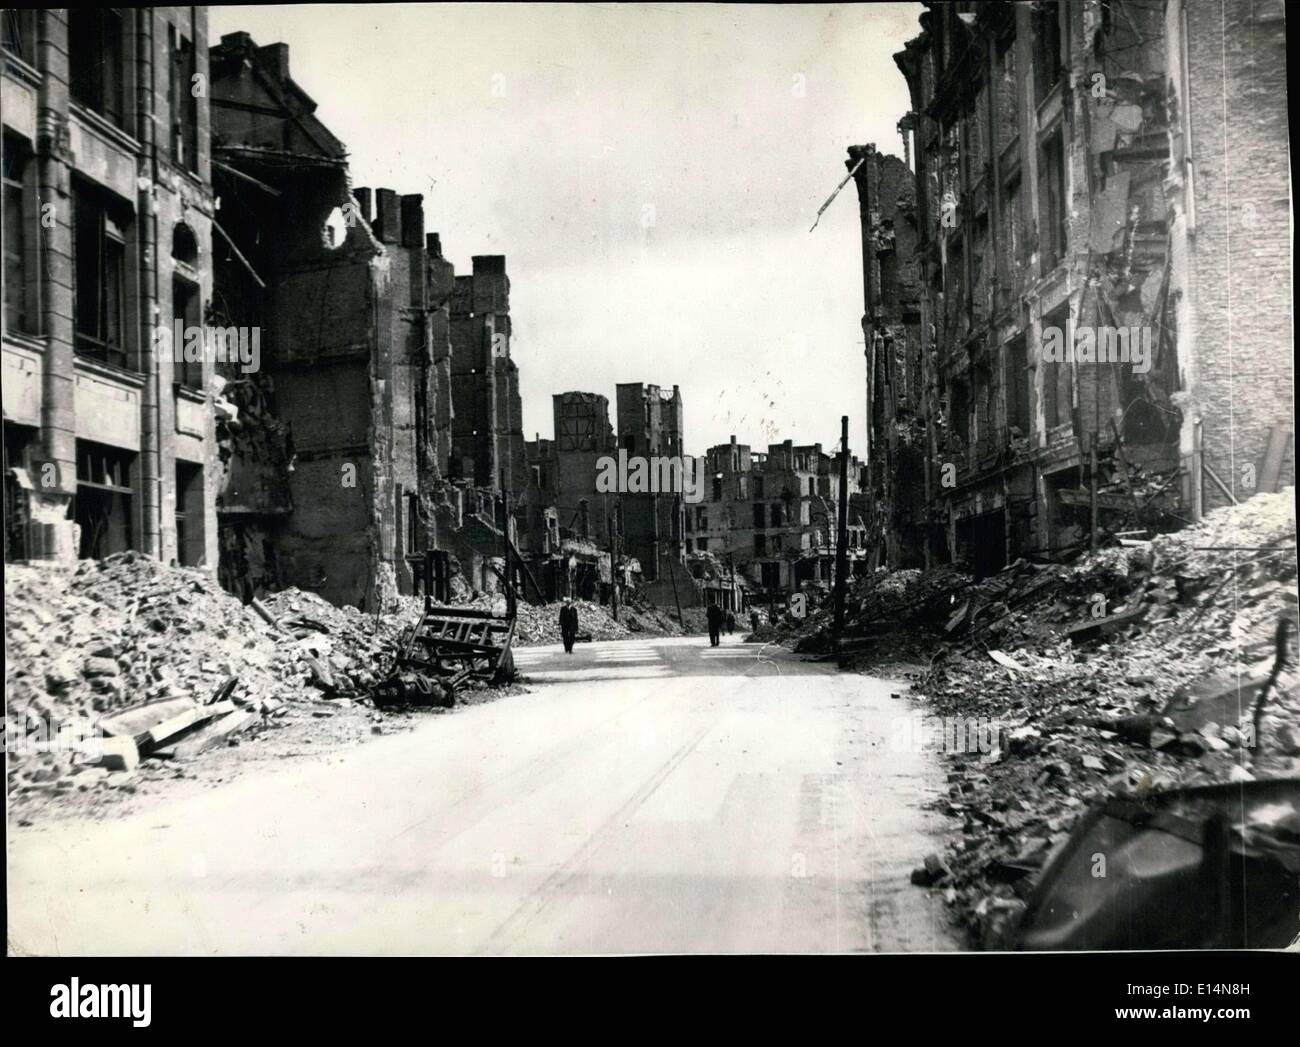 Apr. 09, 2012 - Pictured is Berlin in May 1945. The houses and buildings are in ruins and residents live in the cellars. Stock Photo